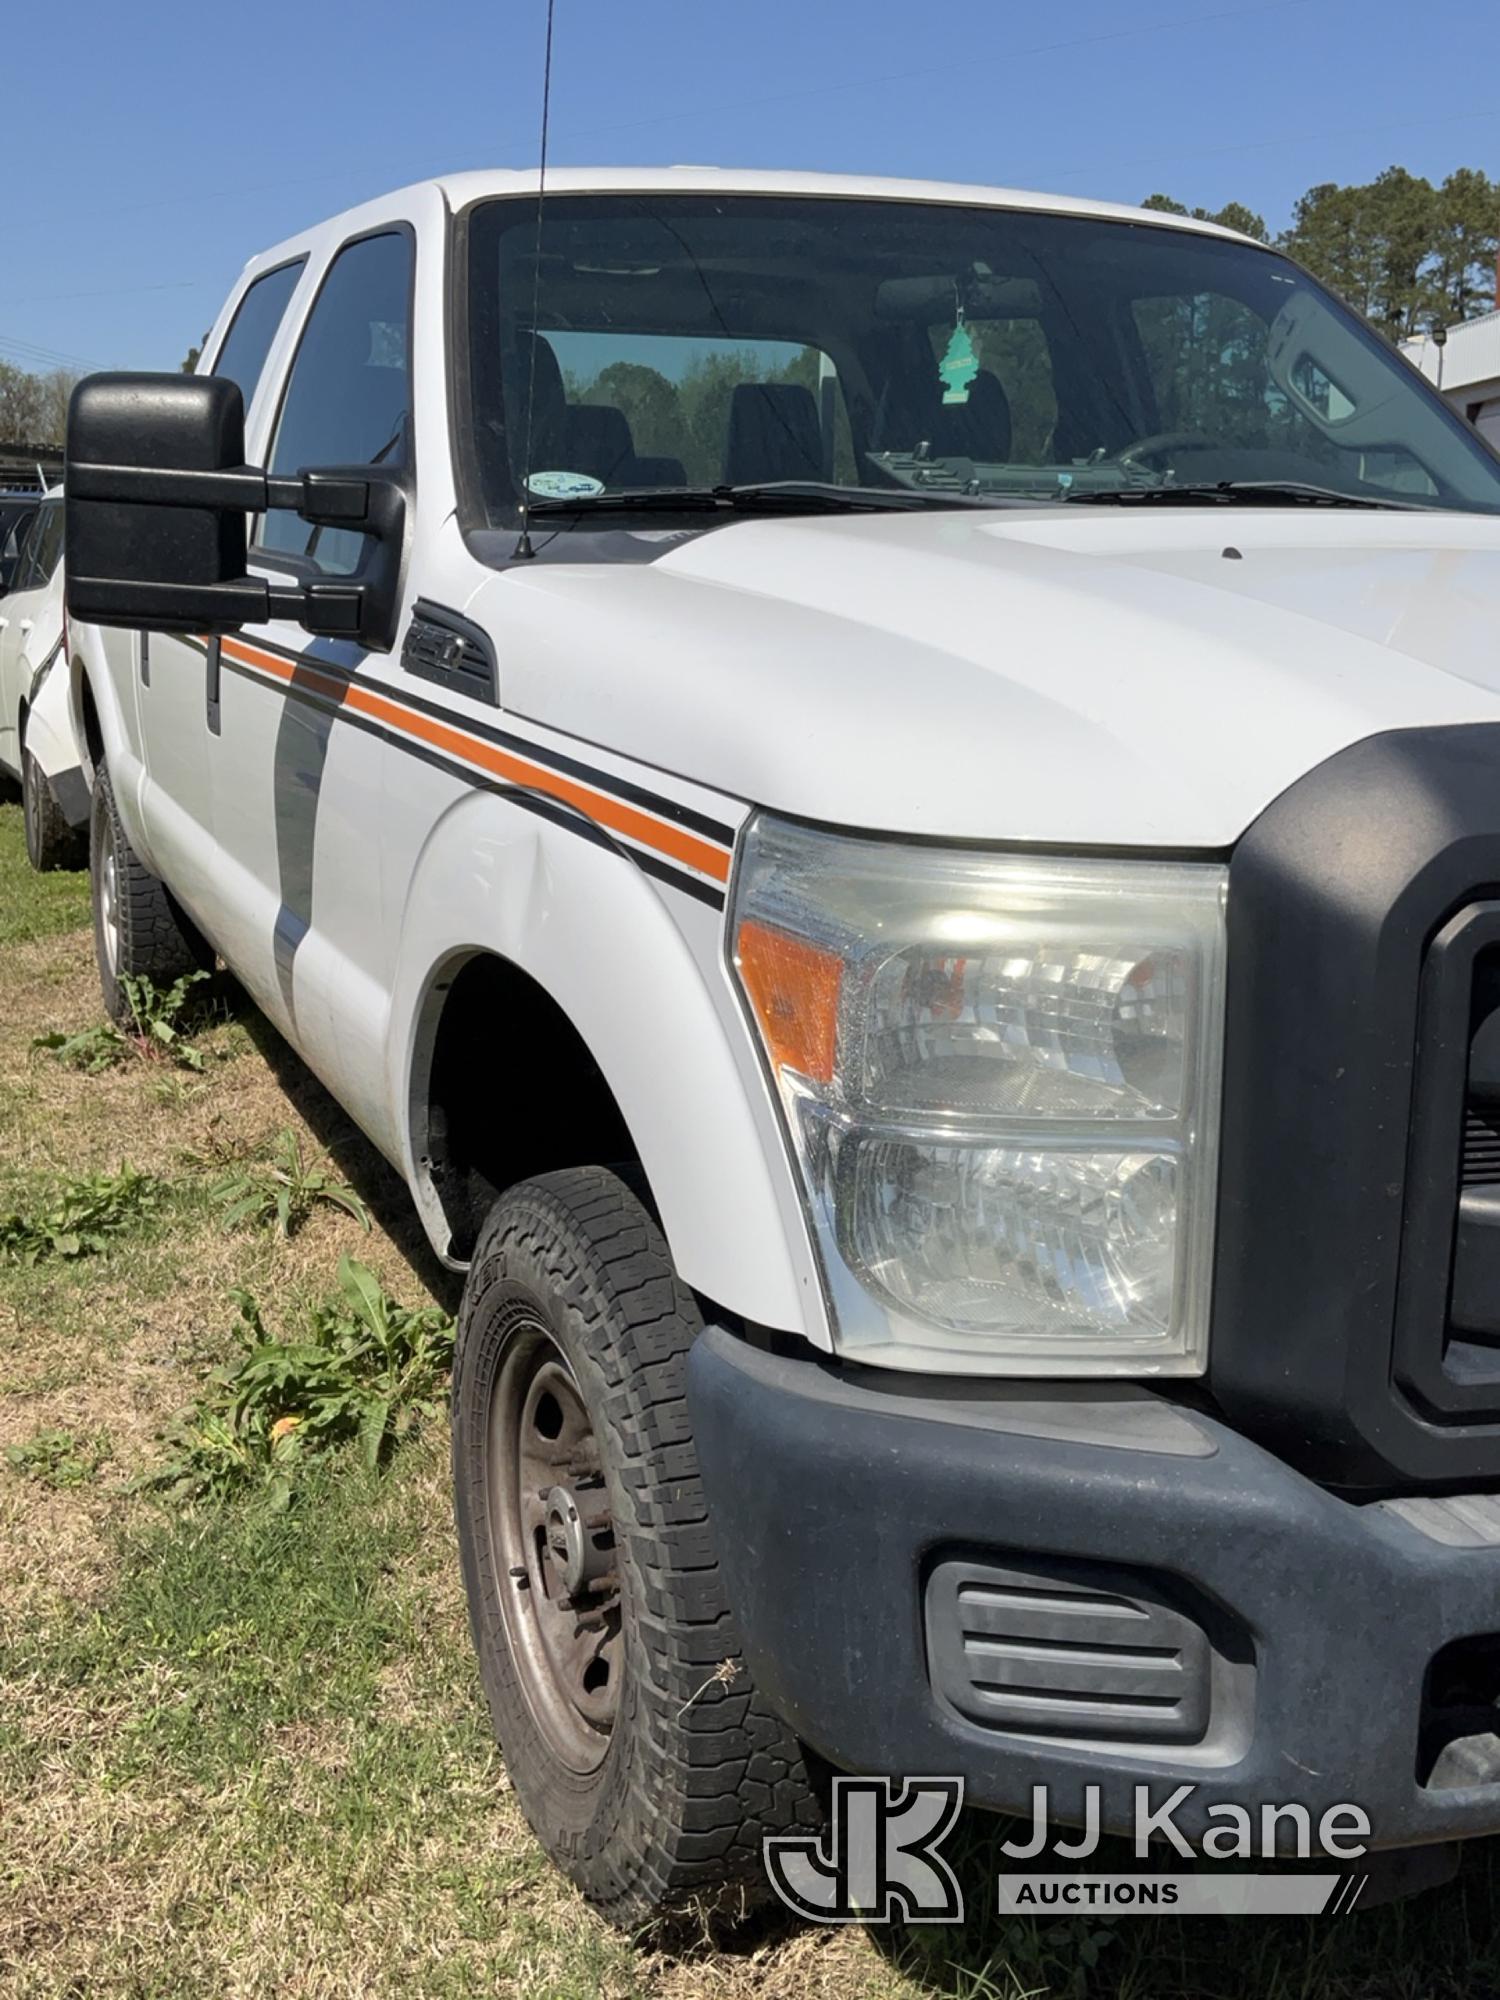 (Florence, SC) 2015 Ford F250 4x4 Crew-Cab Pickup Truck Not Running, Condition Unknown) (Minor Body